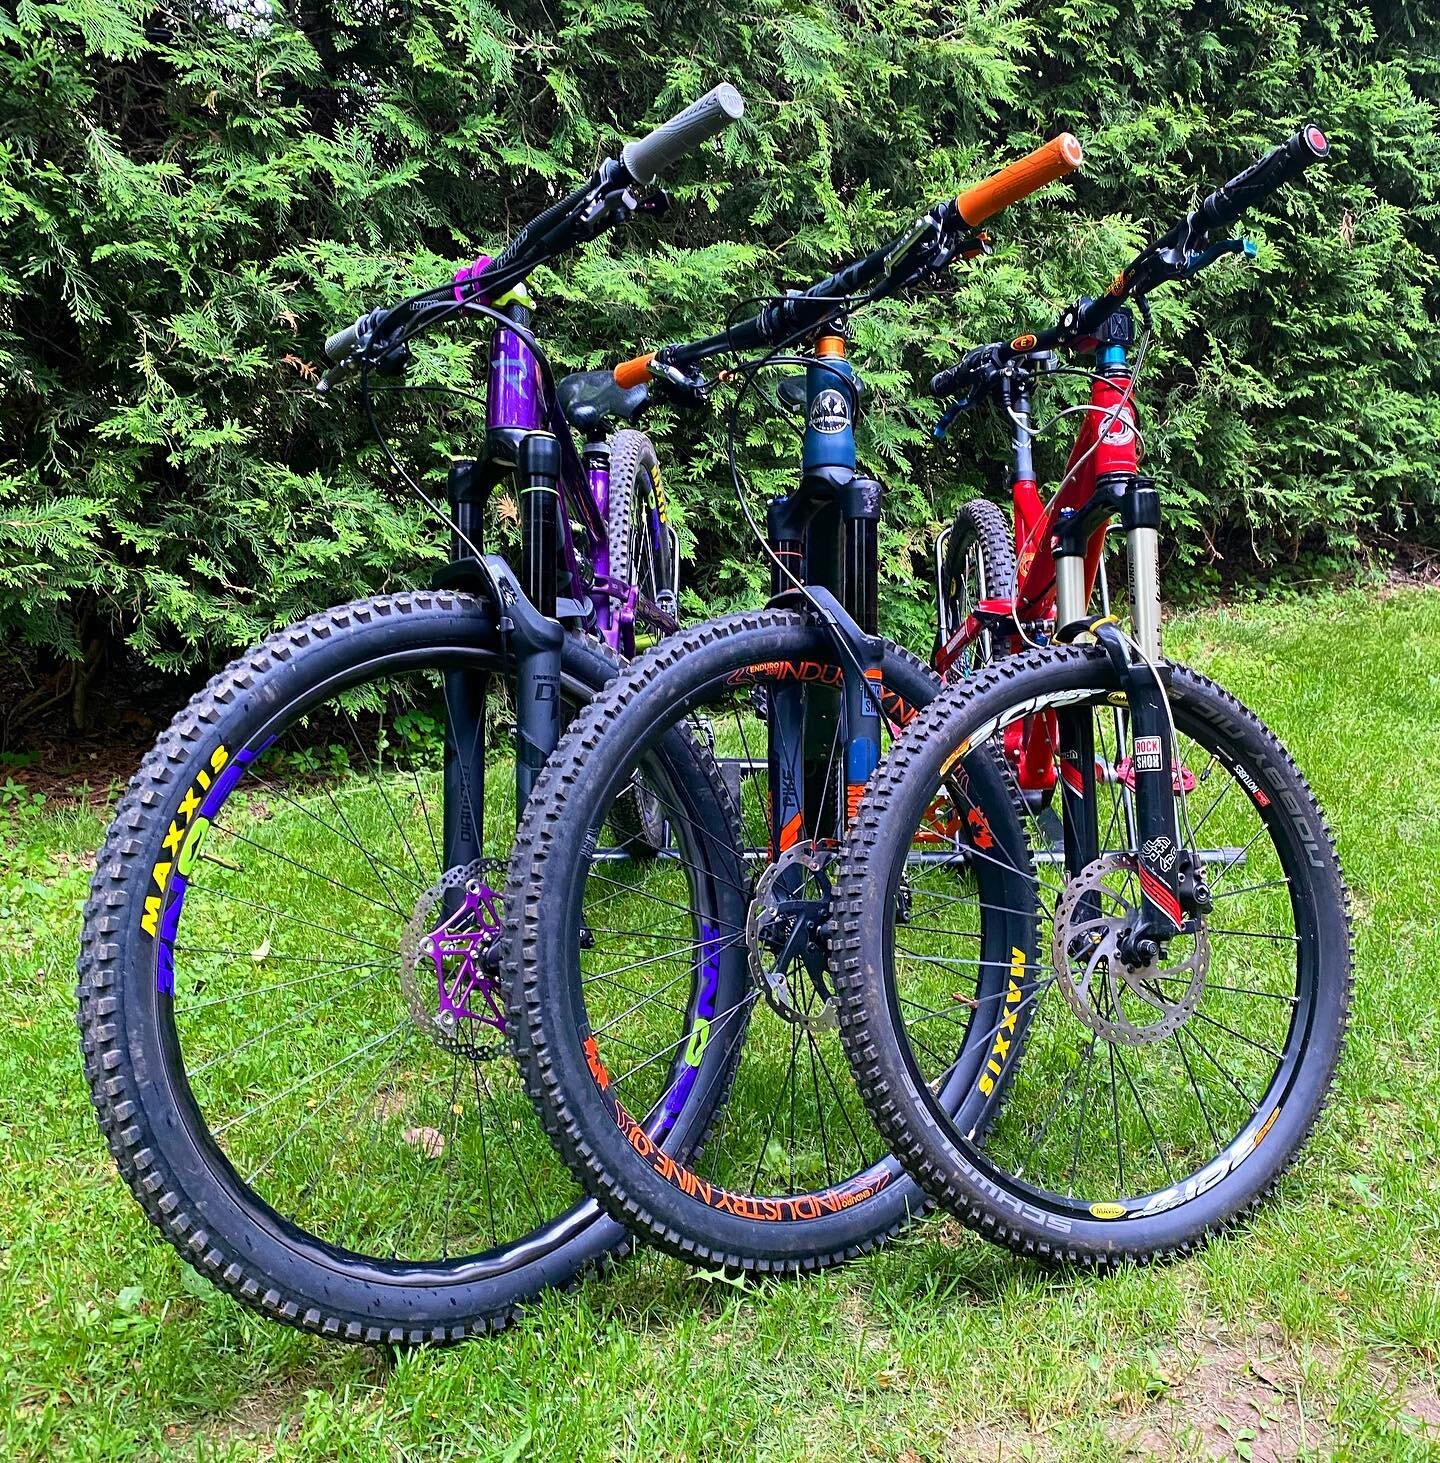 What are you riding?  26&rdquo;, 27.5&rdquo; or 29&rdquo;? Three generations of trail bike lined up. #26aintdead #275aintdead #29forlife #wagonwheels 

Looking for your dream bike?  Let me help!
Give us a follow @bikeandhammmer
Check us out at www.bi